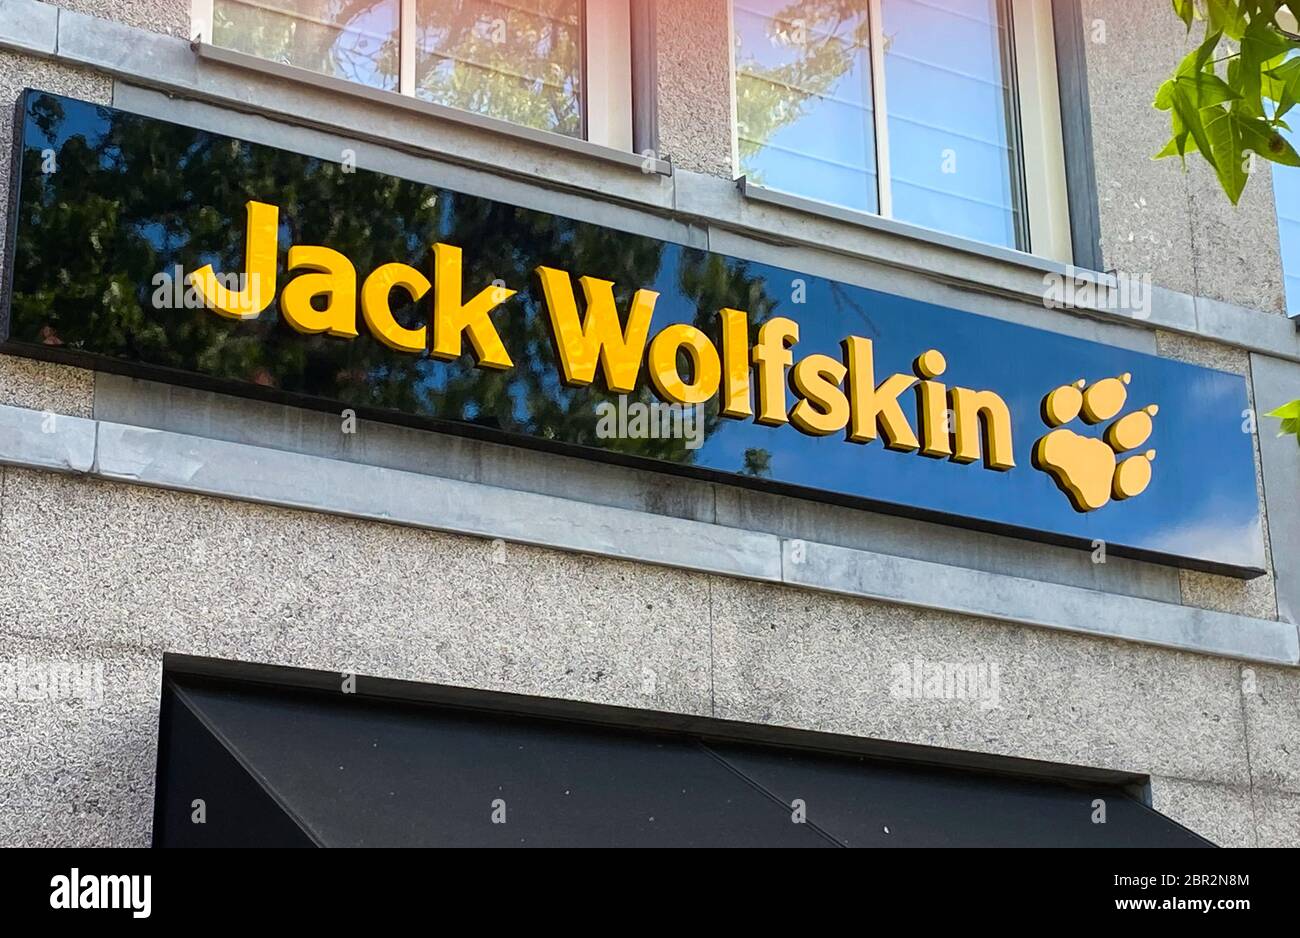 Roermond, Netherlands - May 19. 2020: View on facade with logo lettering of Jack  Wolfskin outdoor fashion company at shop entrance Stock Photo - Alamy